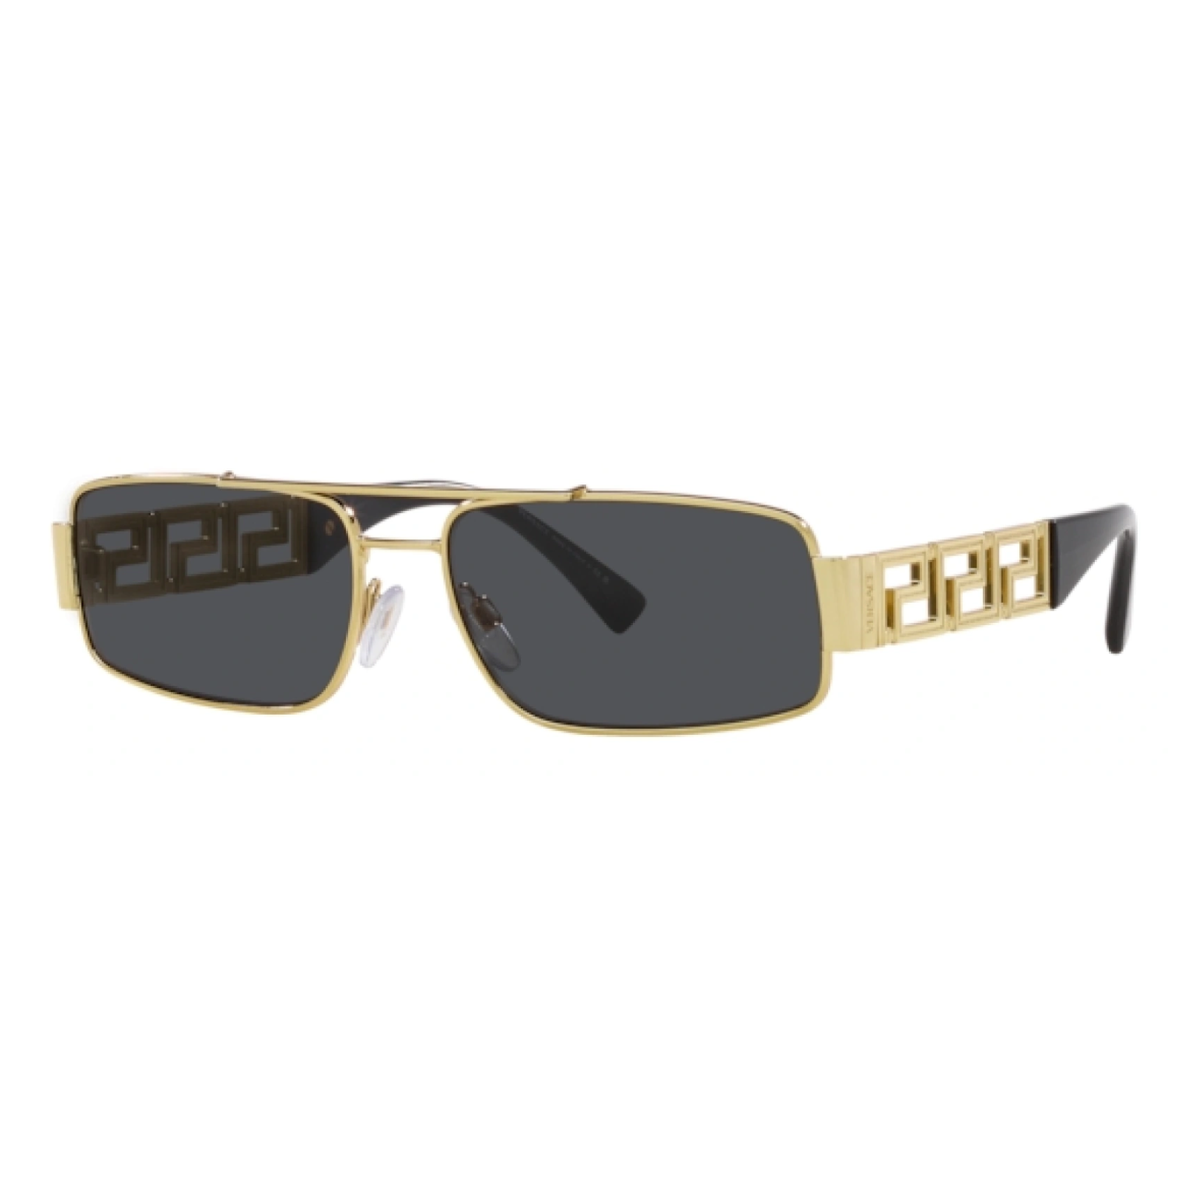 ""Get the latest Versace 2257 1002/87 Sunglasses for Men at Optorium. Stylish gold and black frame with dark grey lenses. Shop now!""